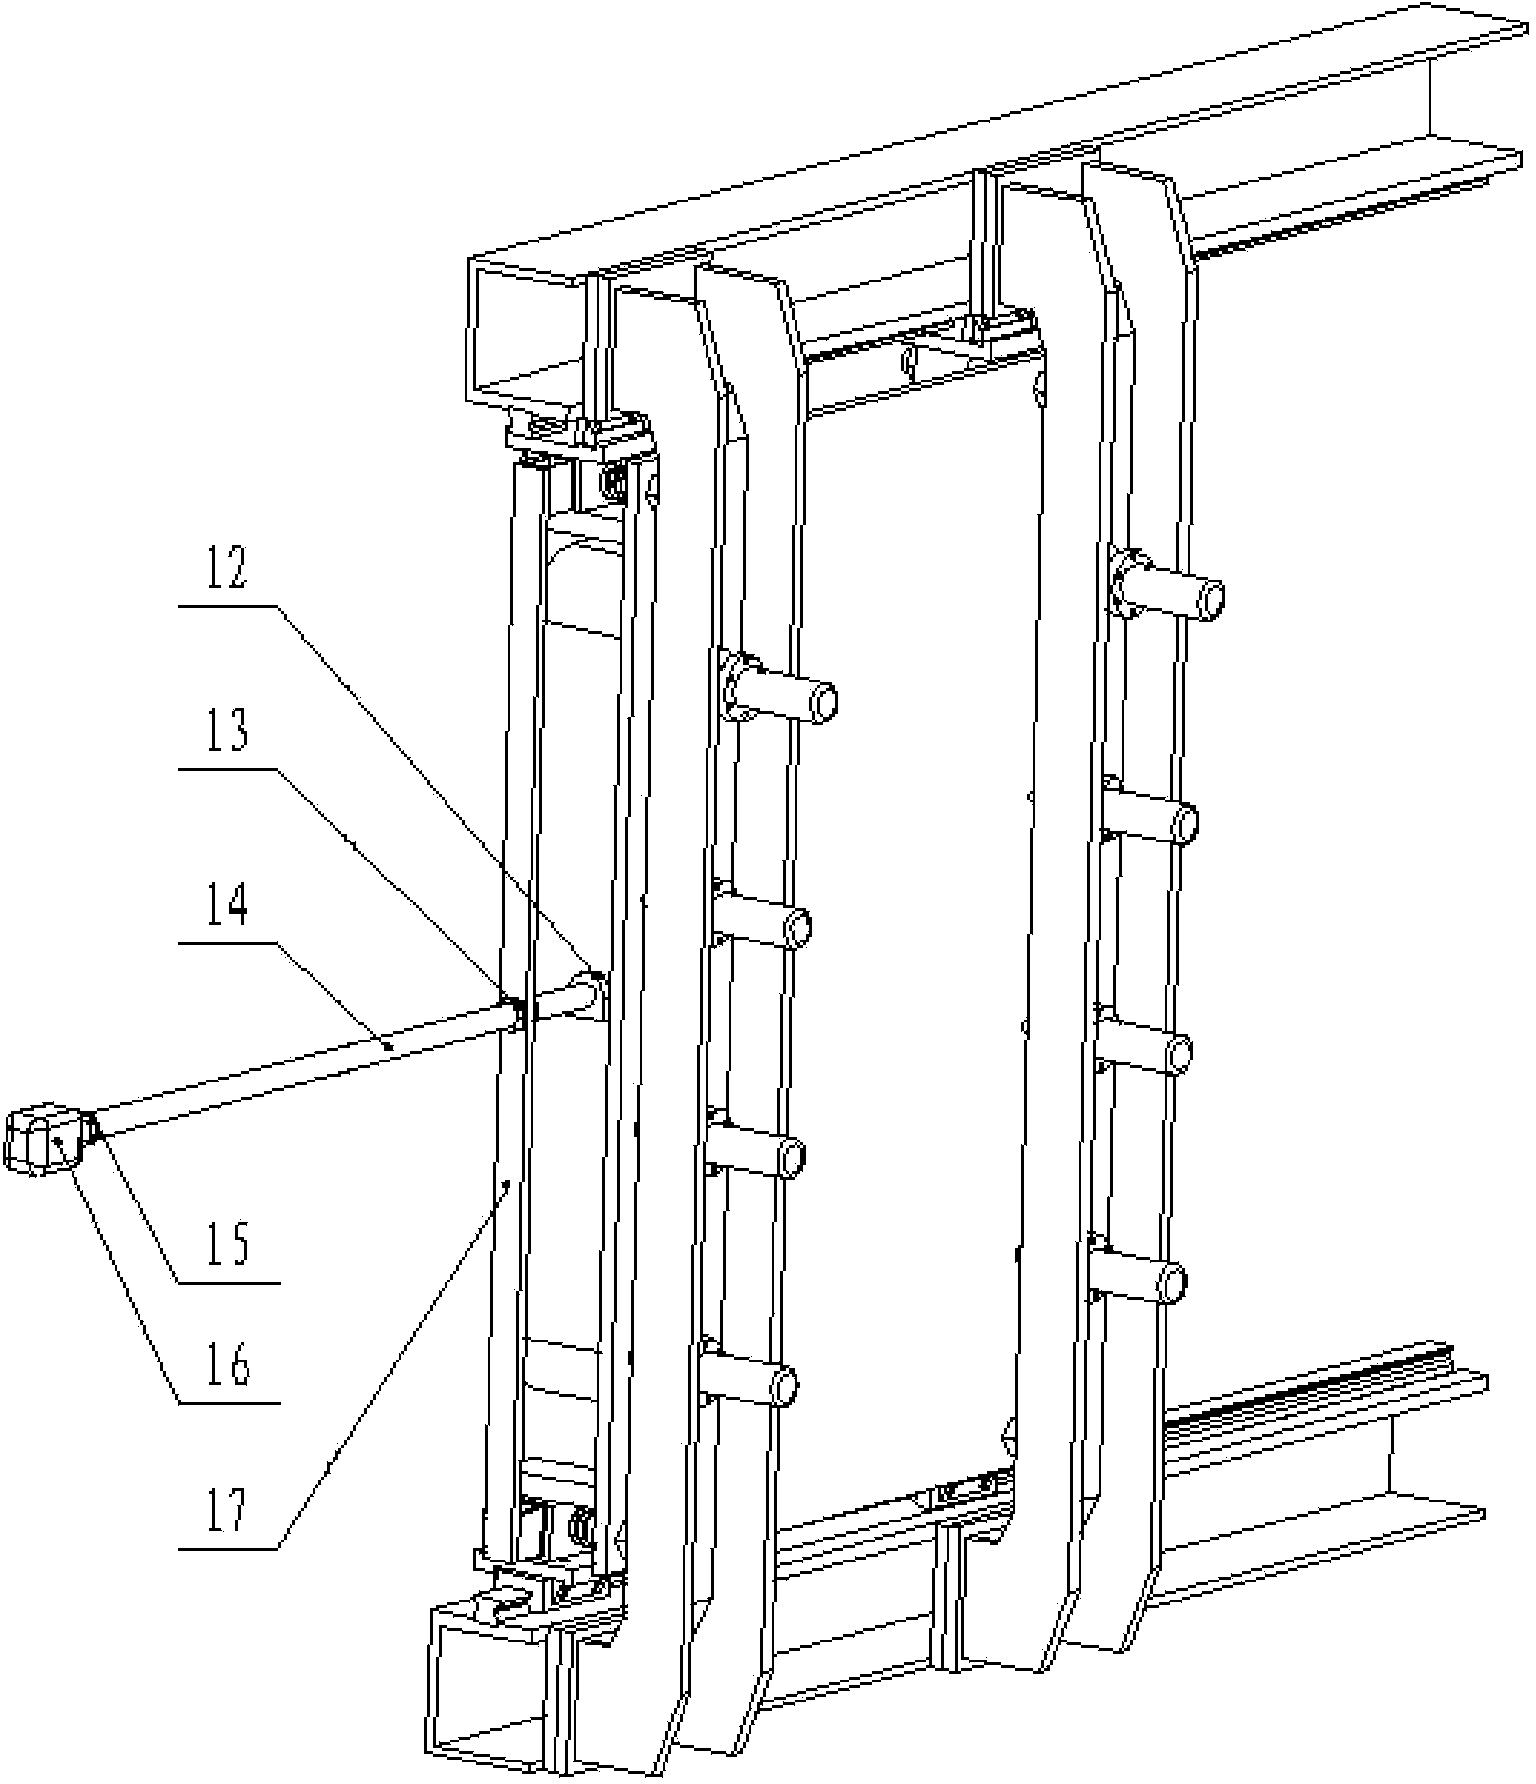 Side door opening/closing mechanism for hypersonic velocity wind tunnel test section